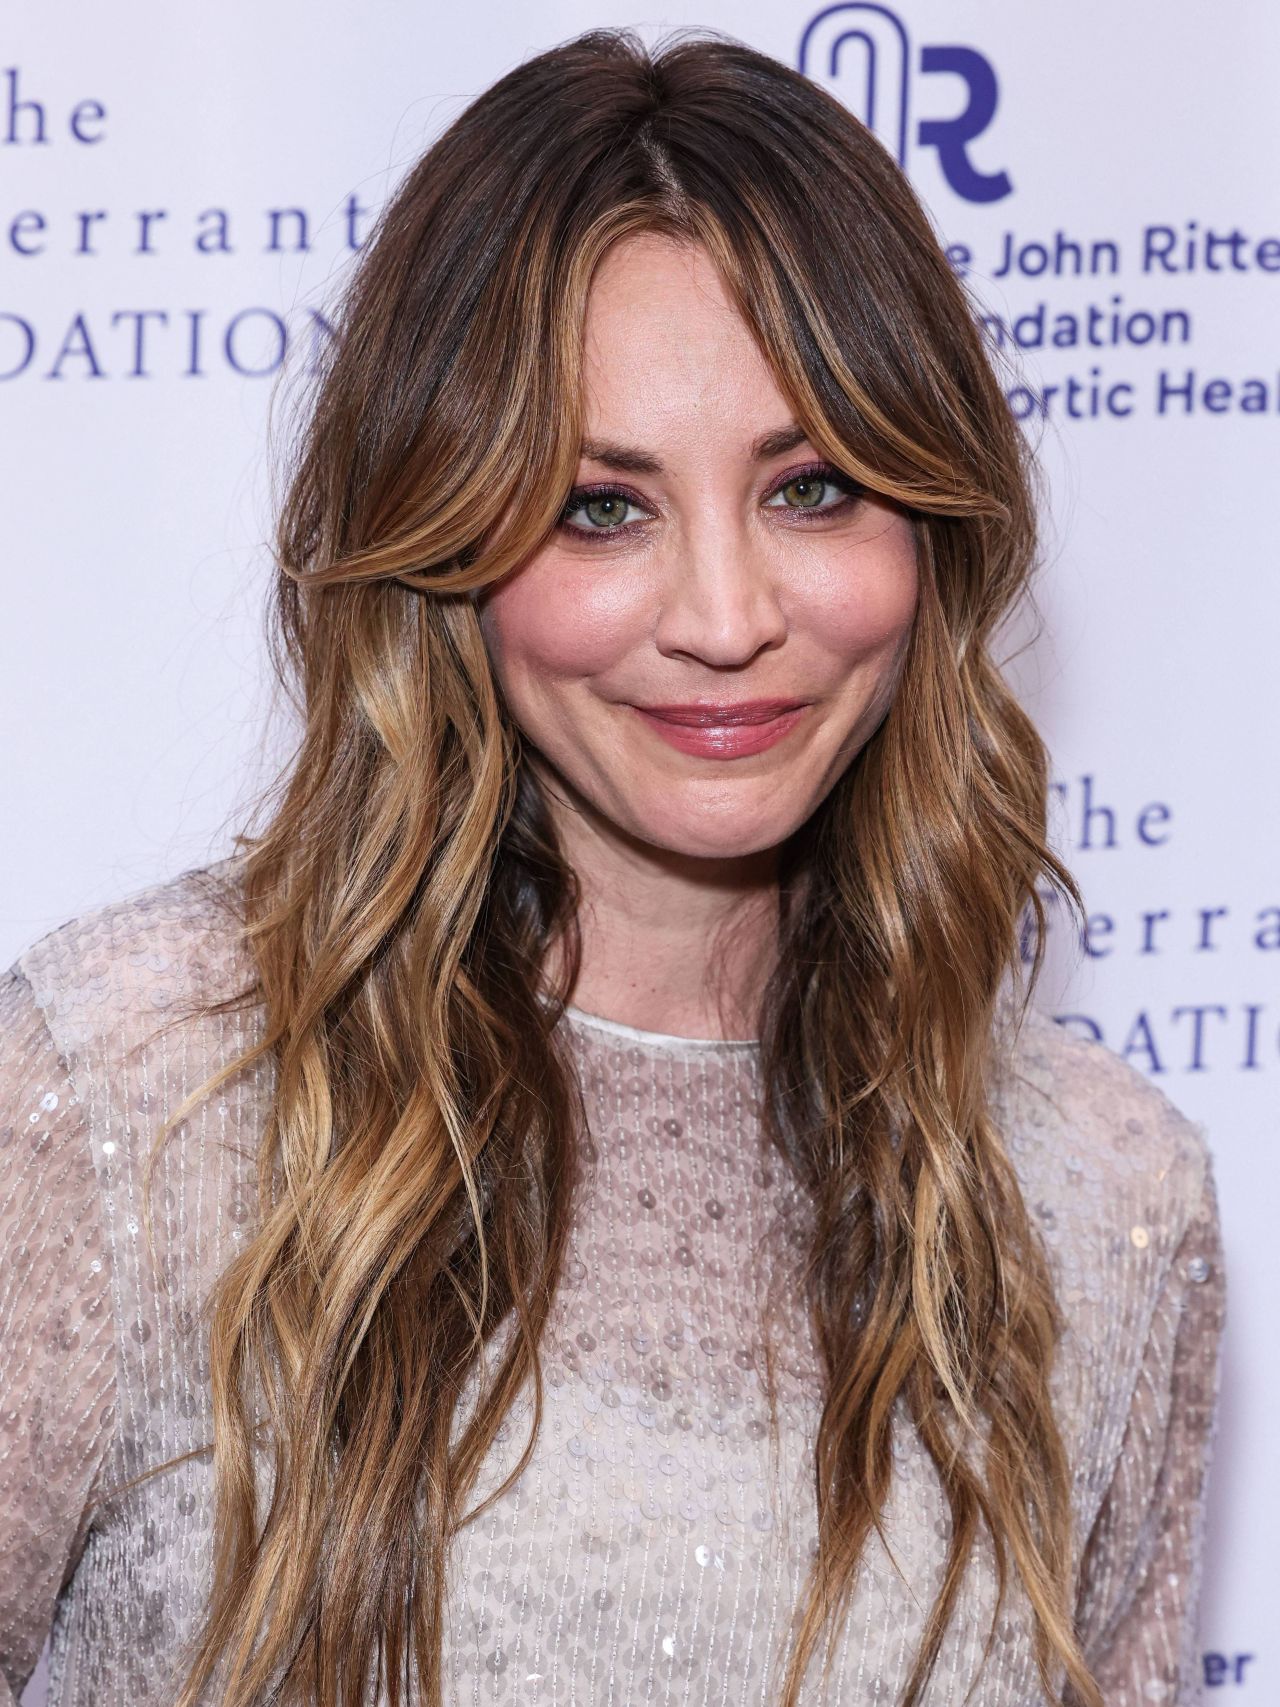 KALEY CUOCO THE JOHN RITTER FOUNDATION FOR AORTIC HEALTH EVENING FROM THE HEART GALA03